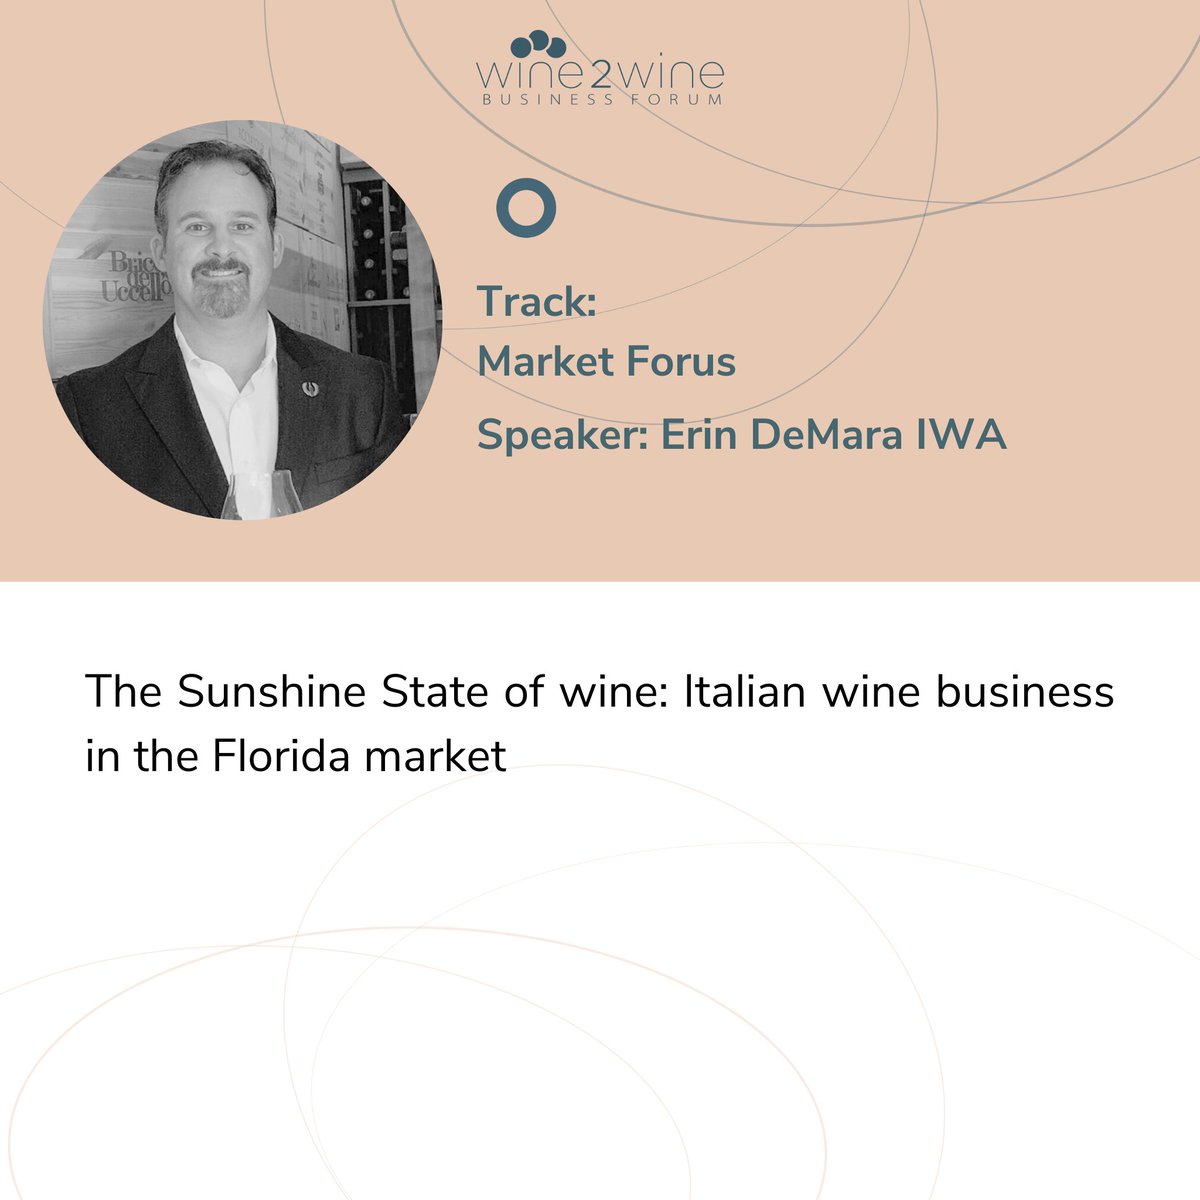 Who are the main wine consumers in #Florida? Which types of 🇮🇹 wines are most popular in this region? @WineKnowFL IWA's session will address these & other questions to provide you with a better understanding of the wine business in the 'Sunshine State' ☀️ #uswinemarket